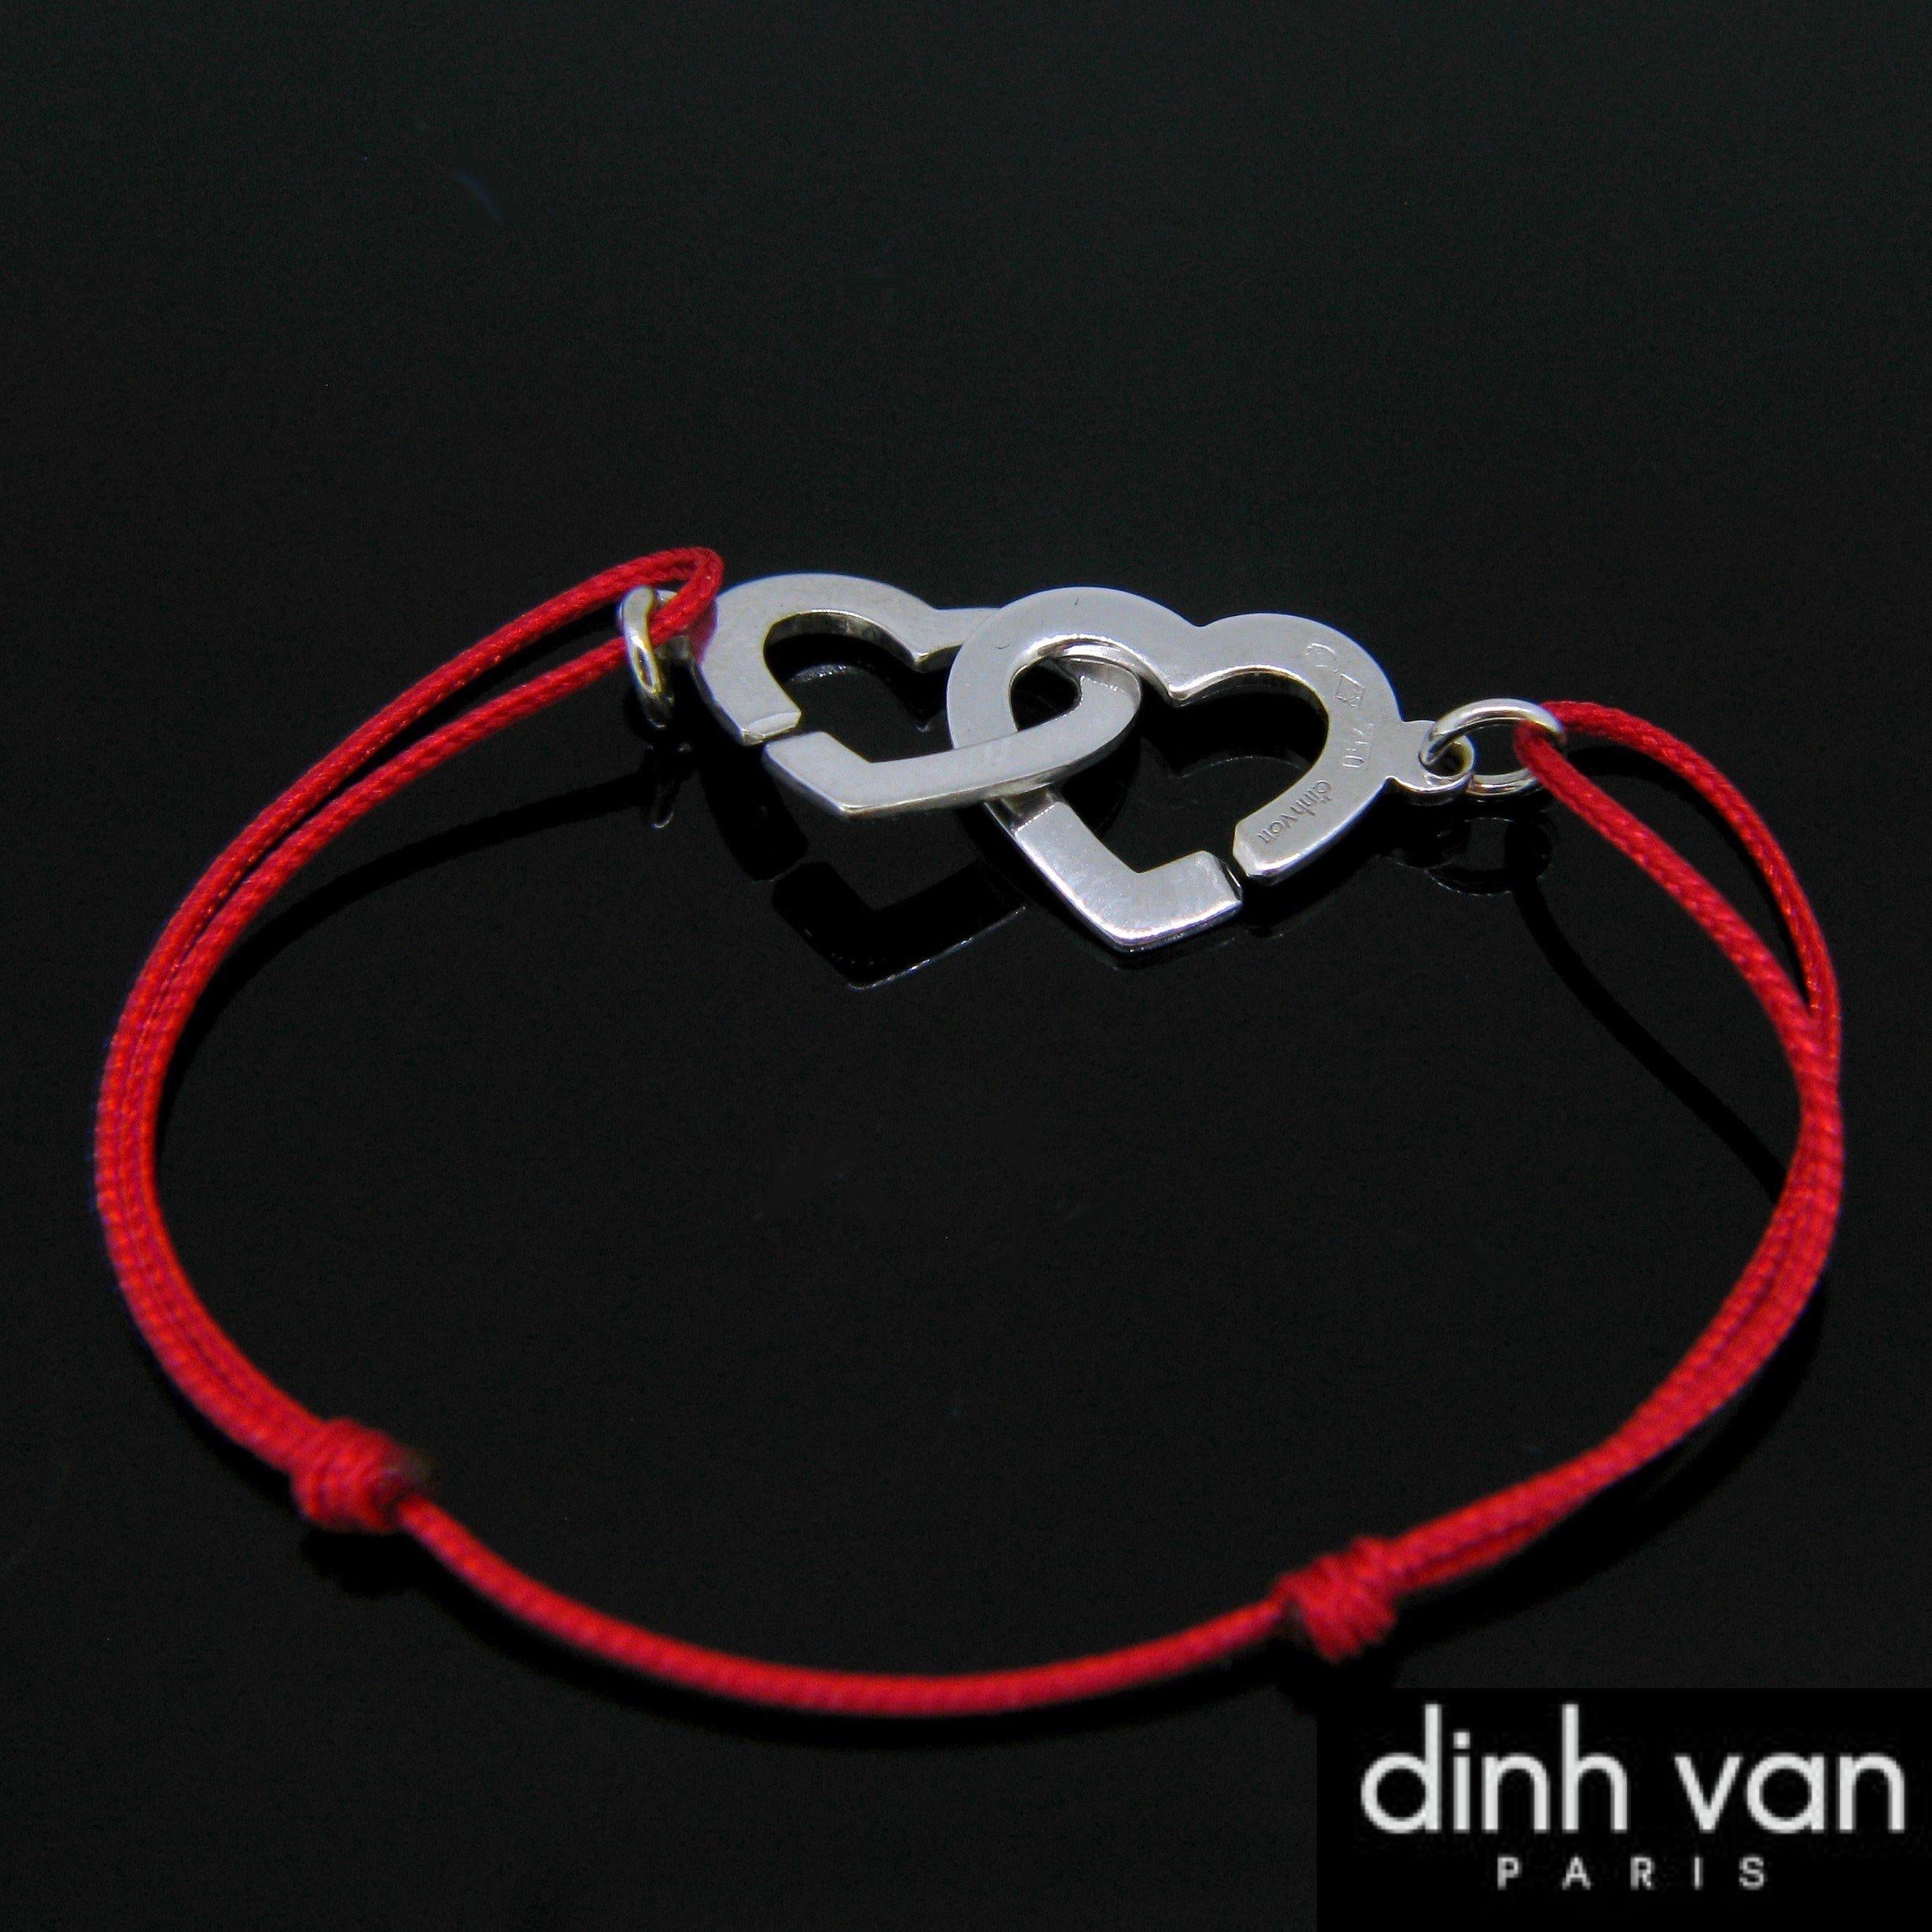 This charming bracelet is from the iconic Dinh Van collection The Menottes. They are shaped as two hearts, to symbolise the bonds of love and friendship. The rope has been replaced and is brand new and the hearts have been polished. It is in